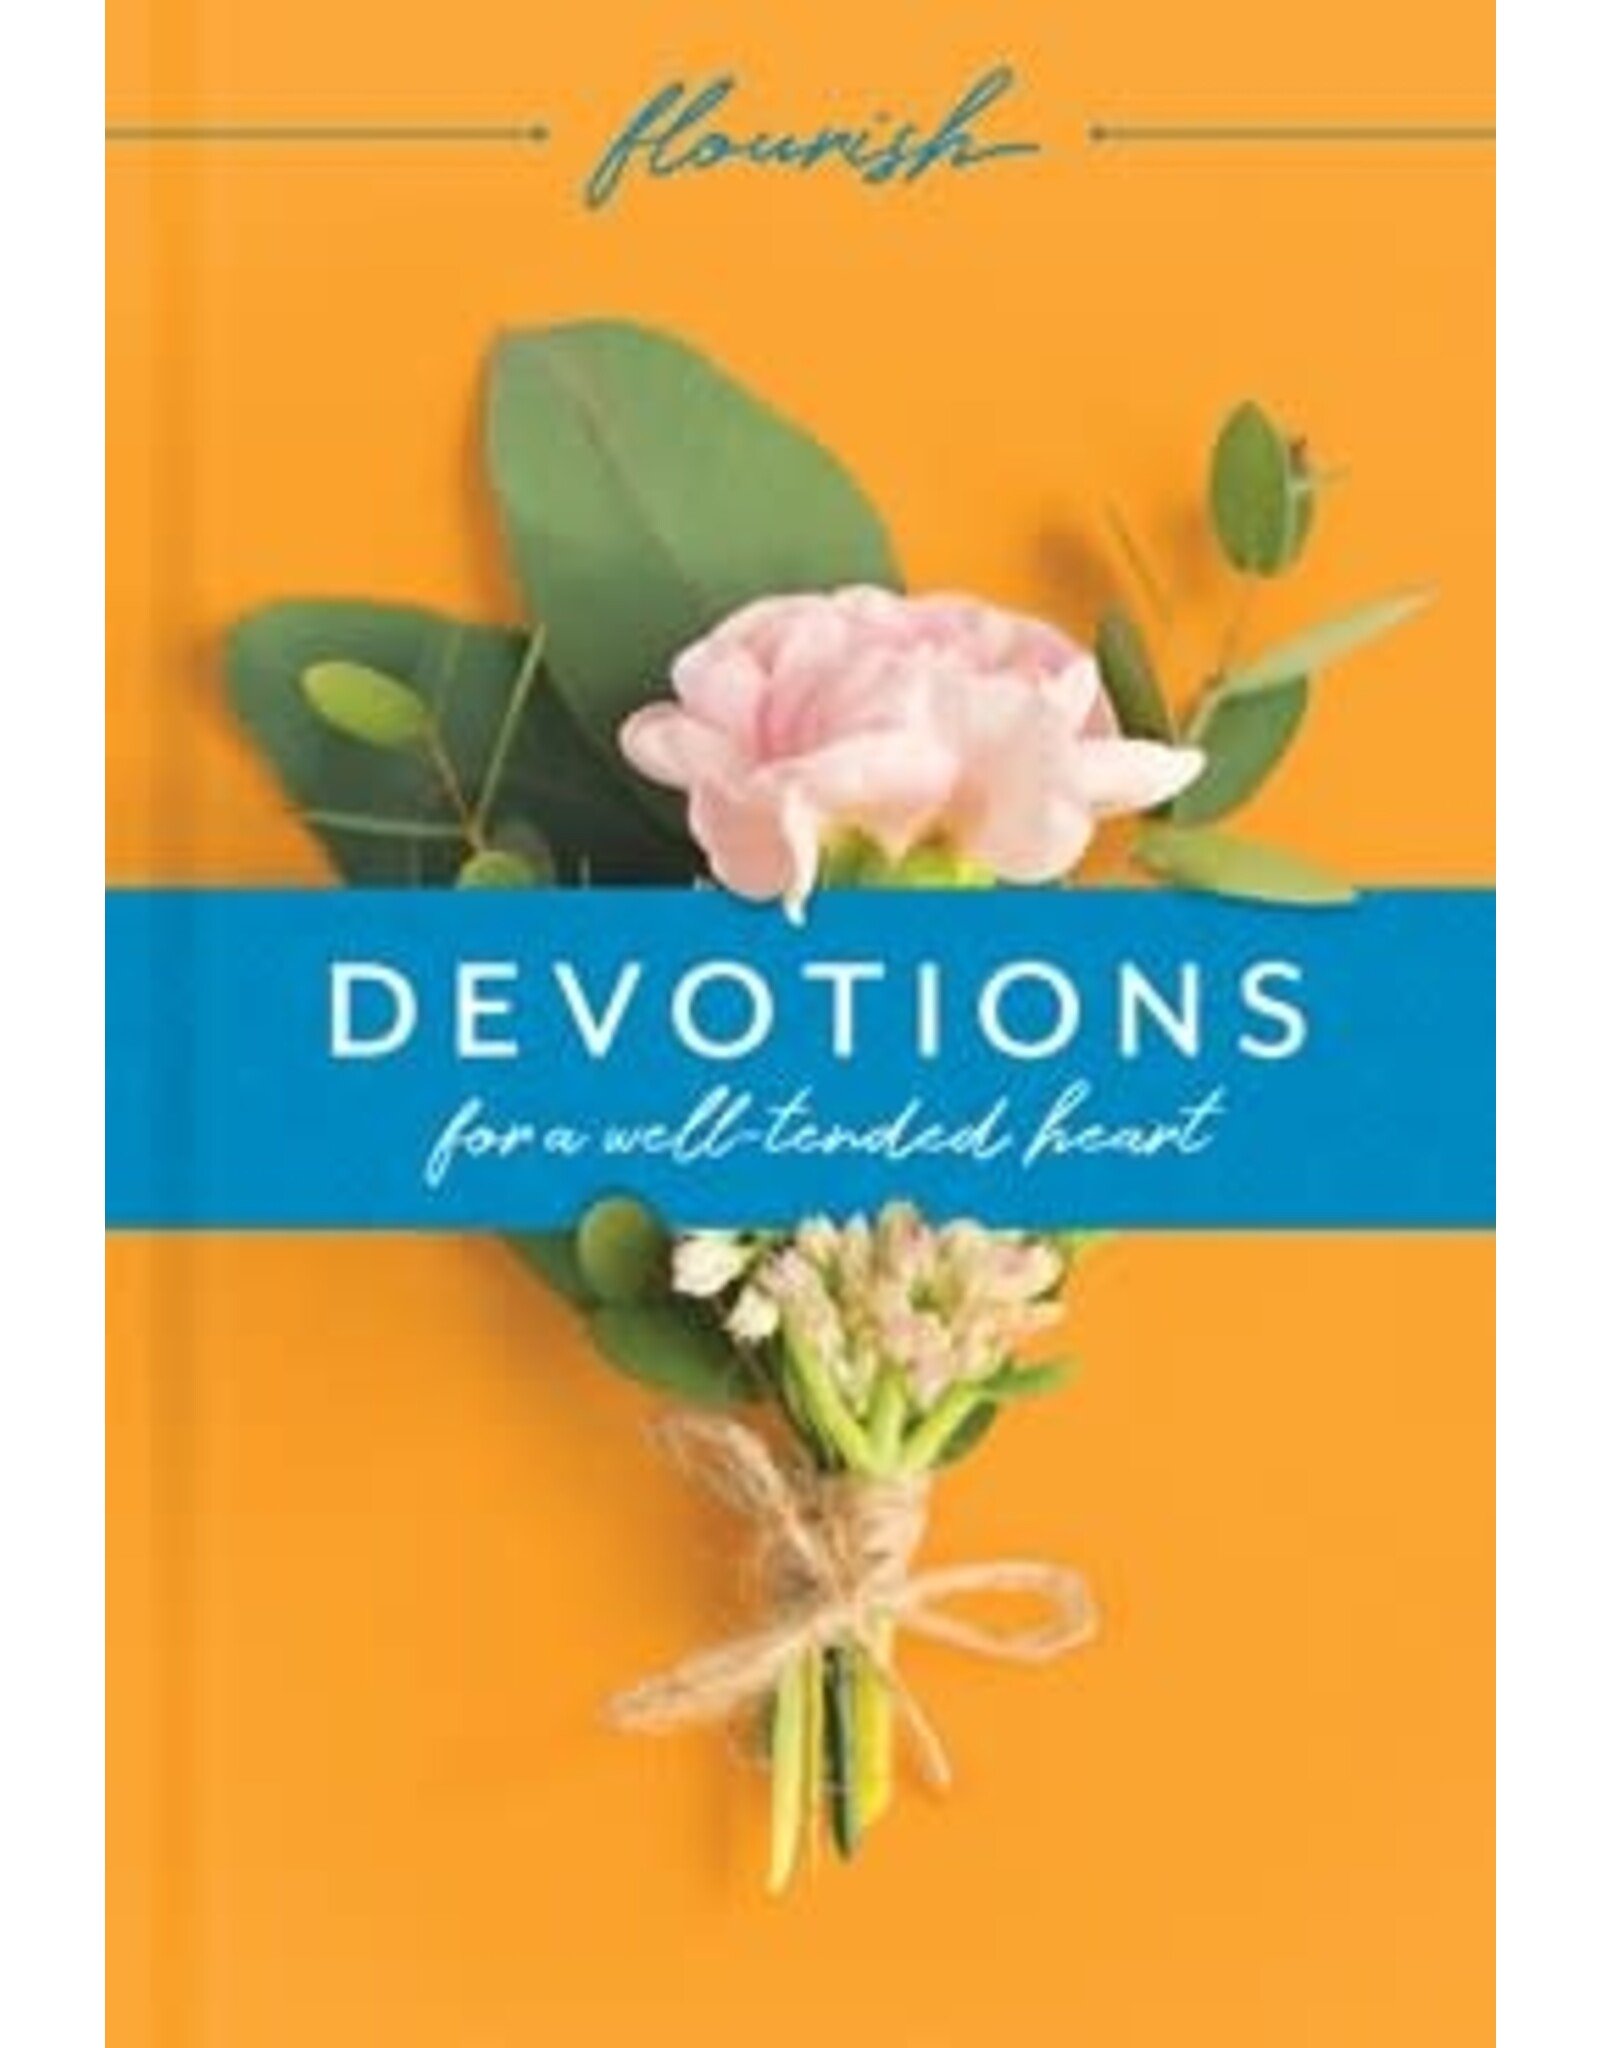 Flourish: Devotions for a Well-Tended Heart by Michael H. Beaumont and Martin H. Manser - Hard Cover